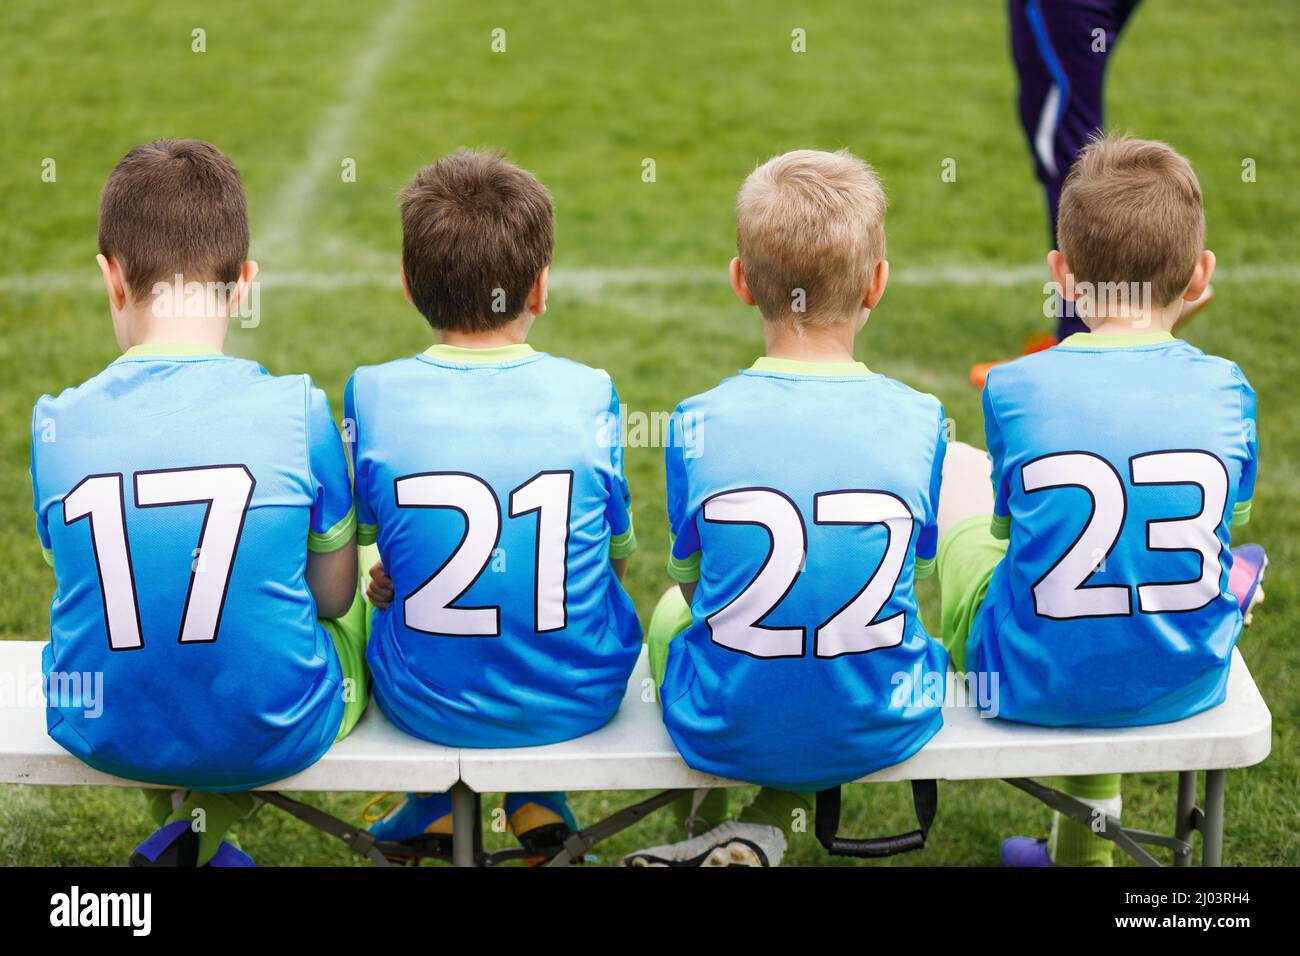 School football team. Soccer players sitting on sideline bench. Youth soccer players sitting together on substitute bench and watching match Stock Photo